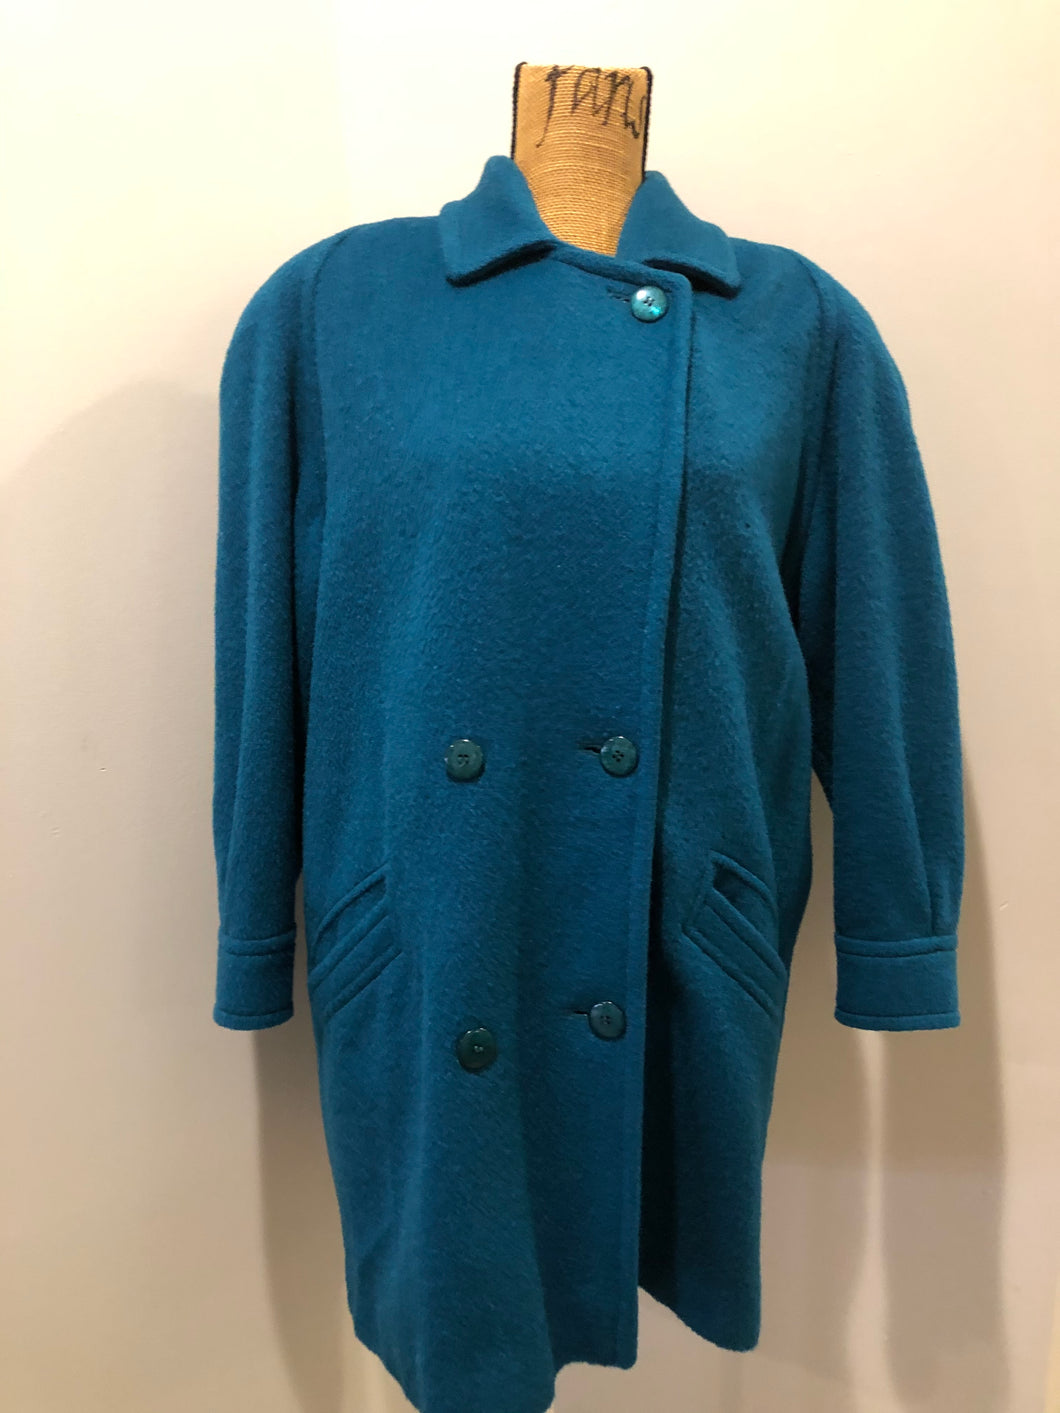 Kingspier Vintage - Marks & Spencer 1980’s mohair and wool blend, double breasted teal coat. Fits a size 10.